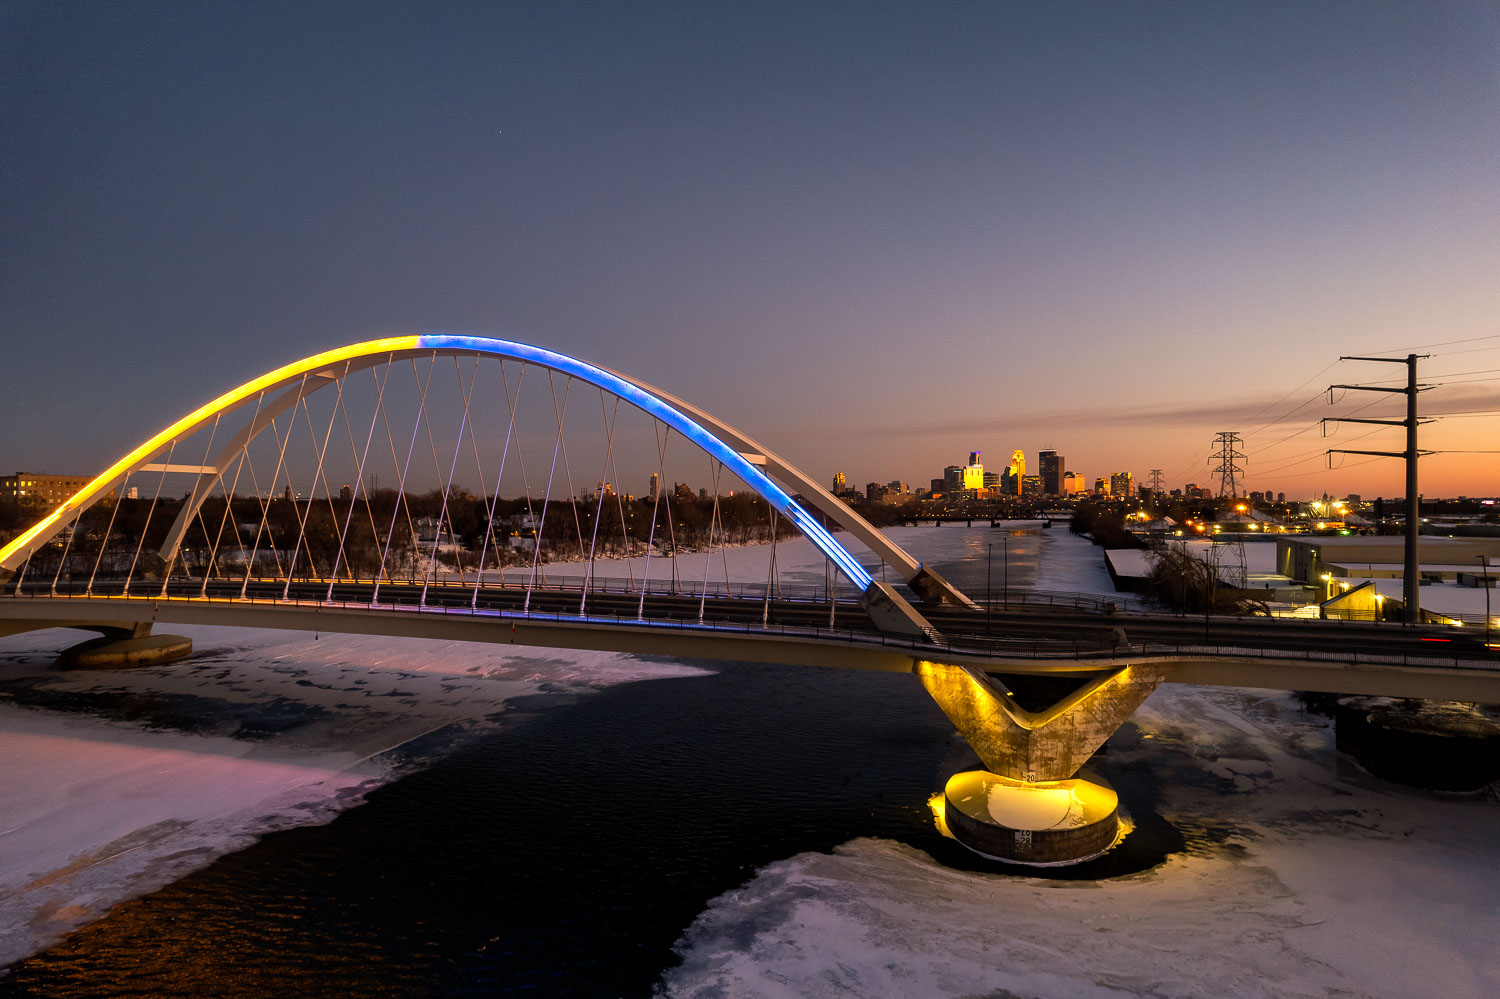 Lowry Avenue Bridge in Minneapolis during sunset tonight lit in yellow and blue in support of the people of Ukraine. The bridge is one of many structures around the city that are reportedly going to be lit in the colors of the Ukrainian flag this weekend.